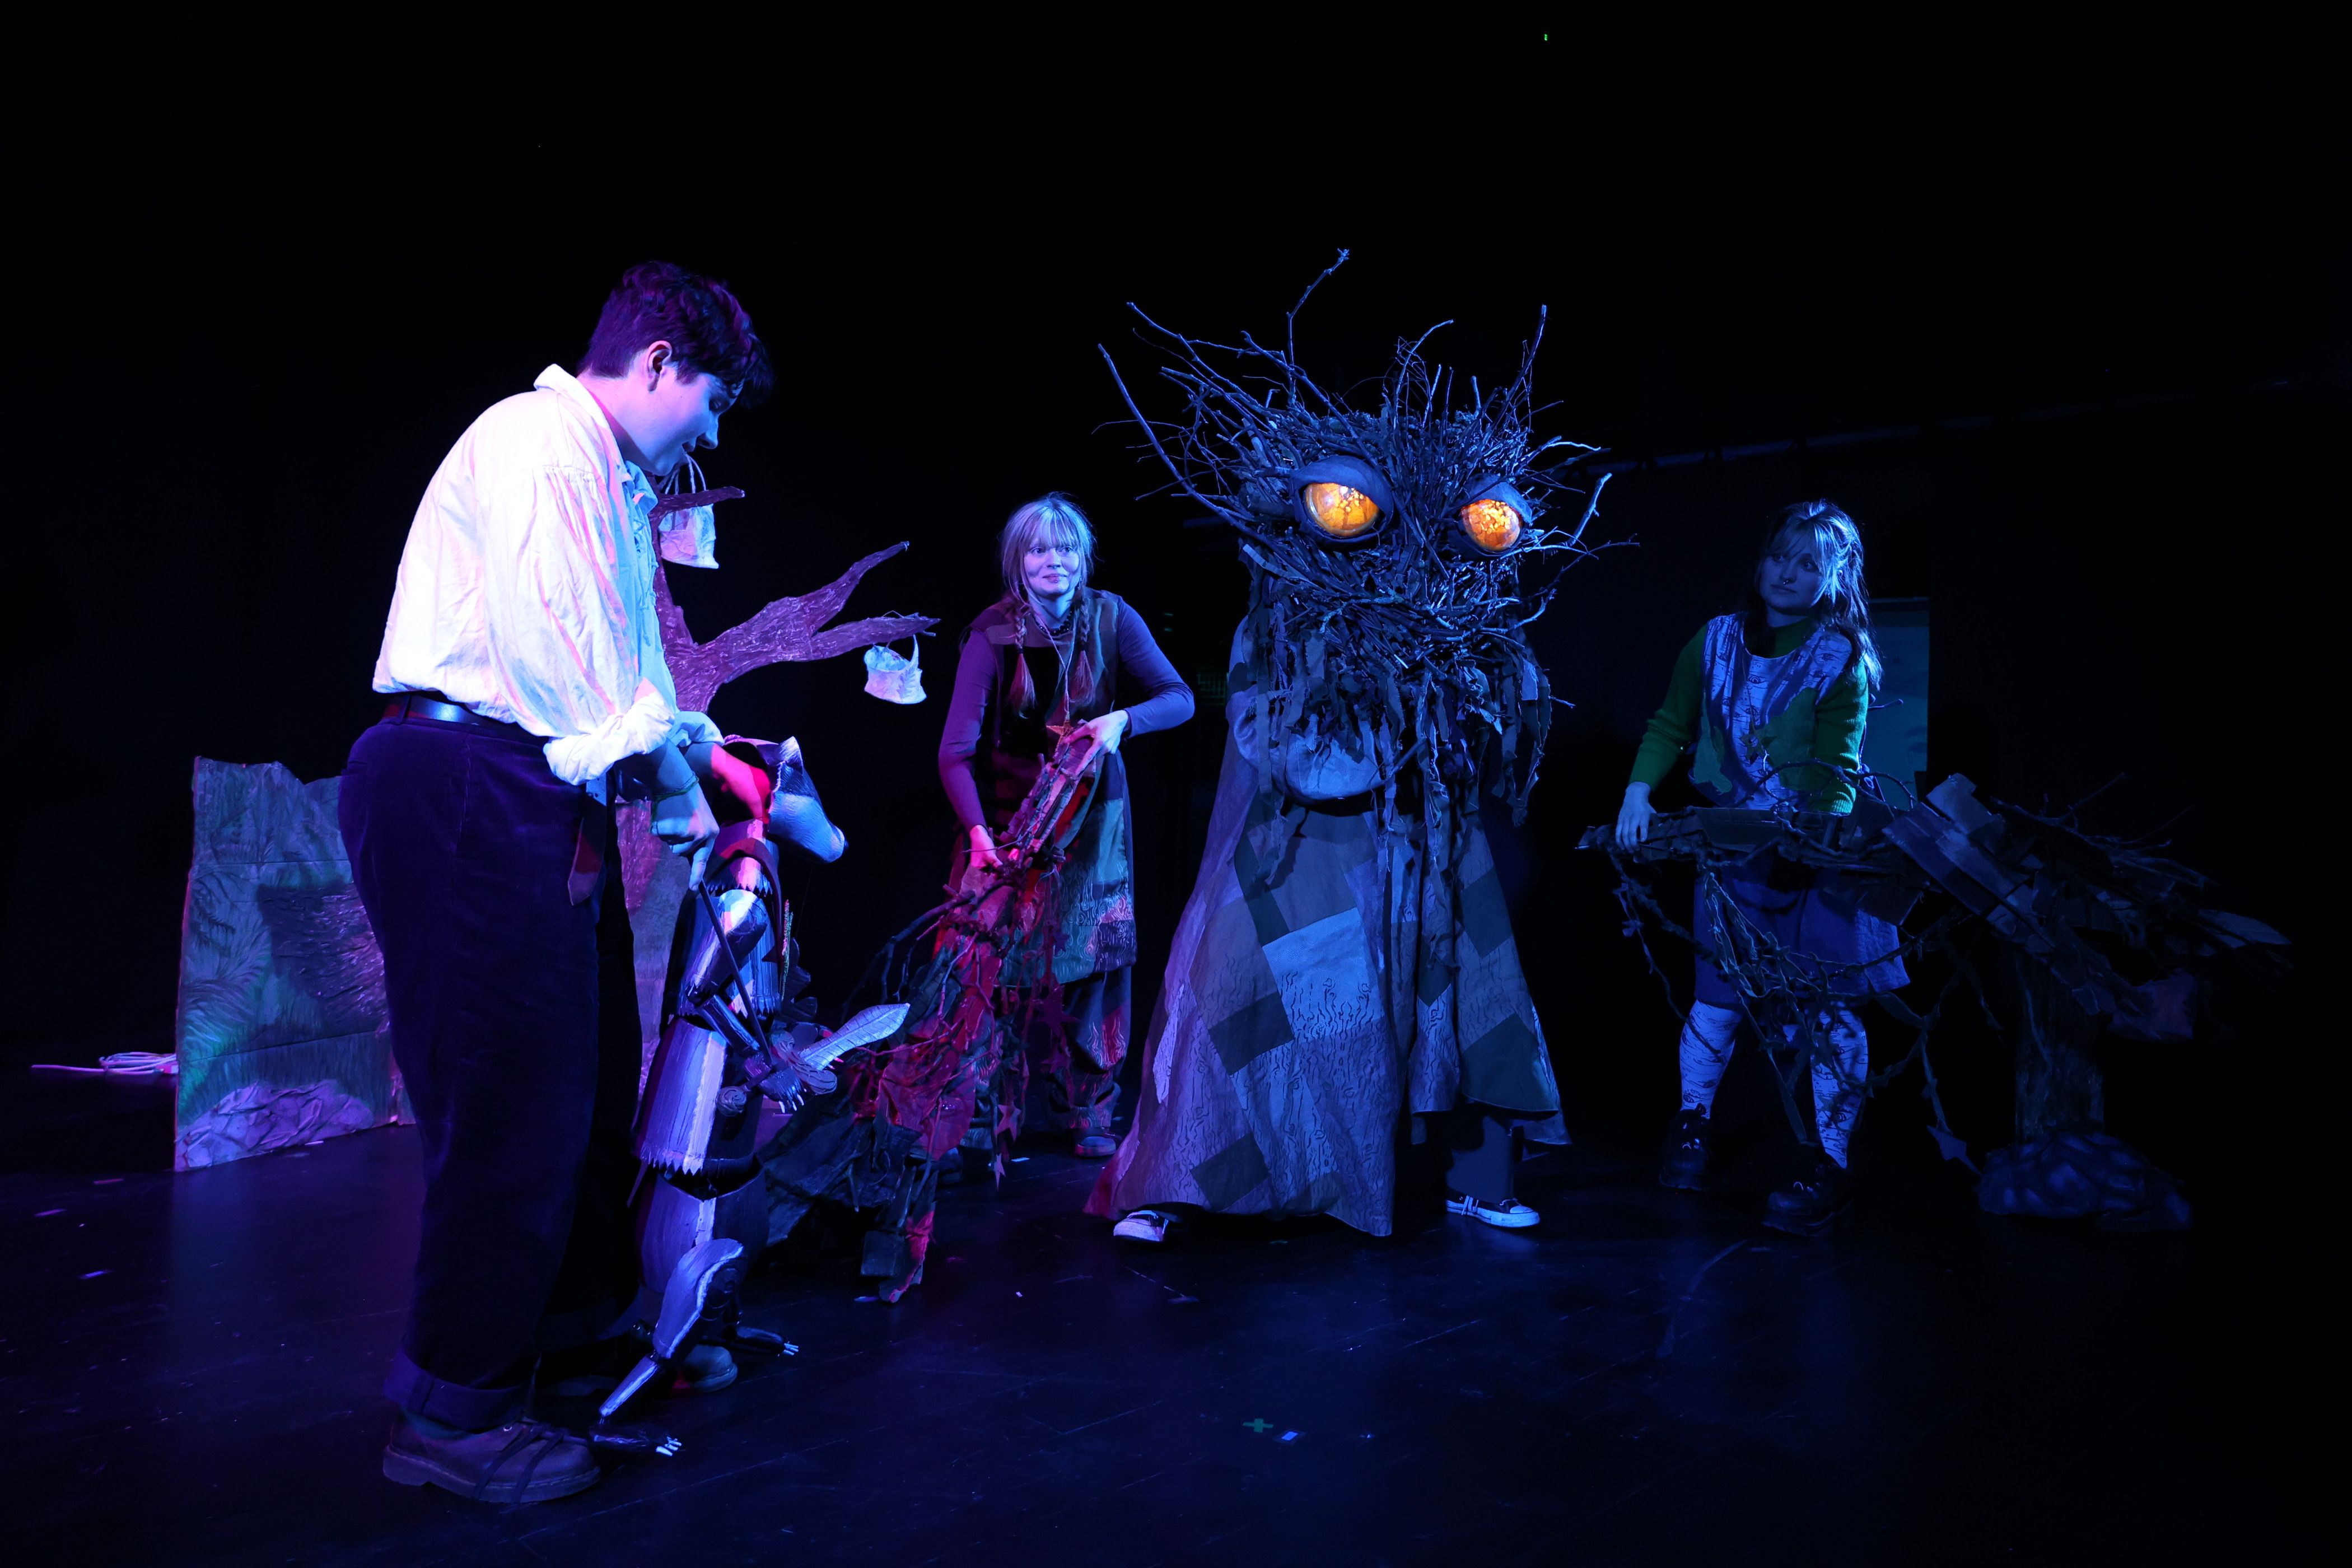 Images show 3 performers on stage with a 4th actor wearing a large wooden headpiece with yellow glowing eyes.